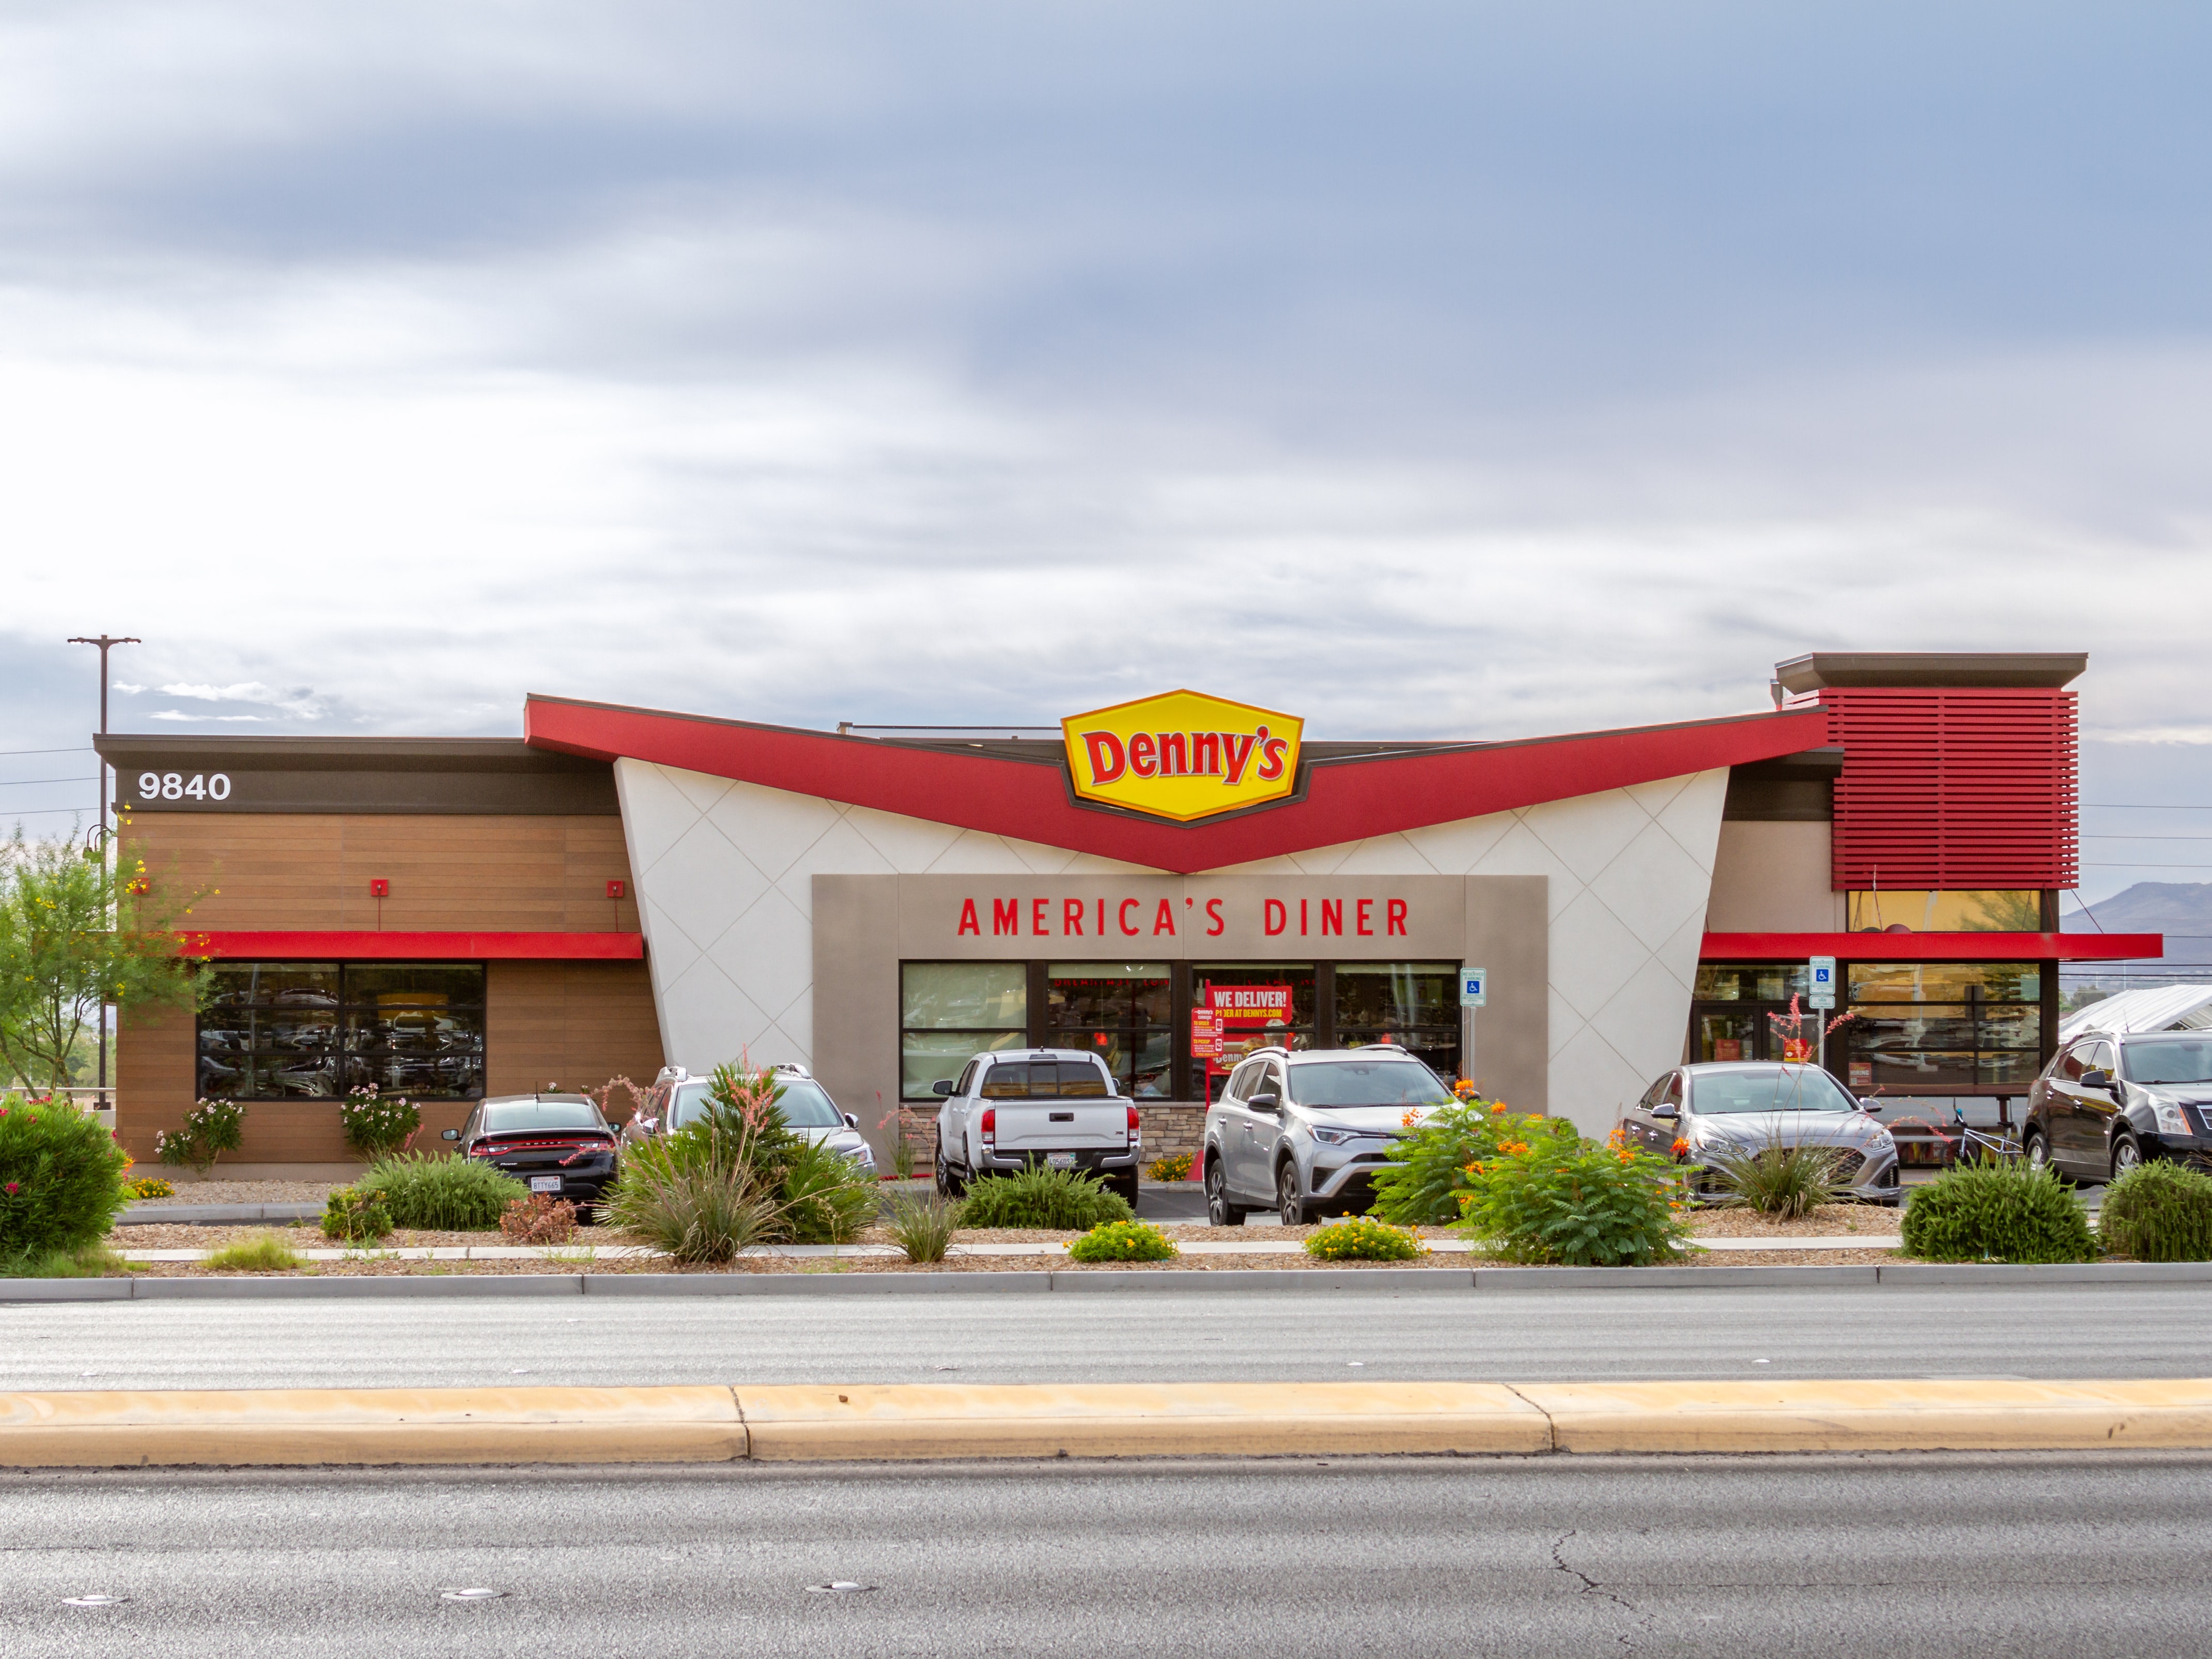 Denny's: Early Signs Of A Turnaround, But Issues Remain (NASDAQ:DENN)